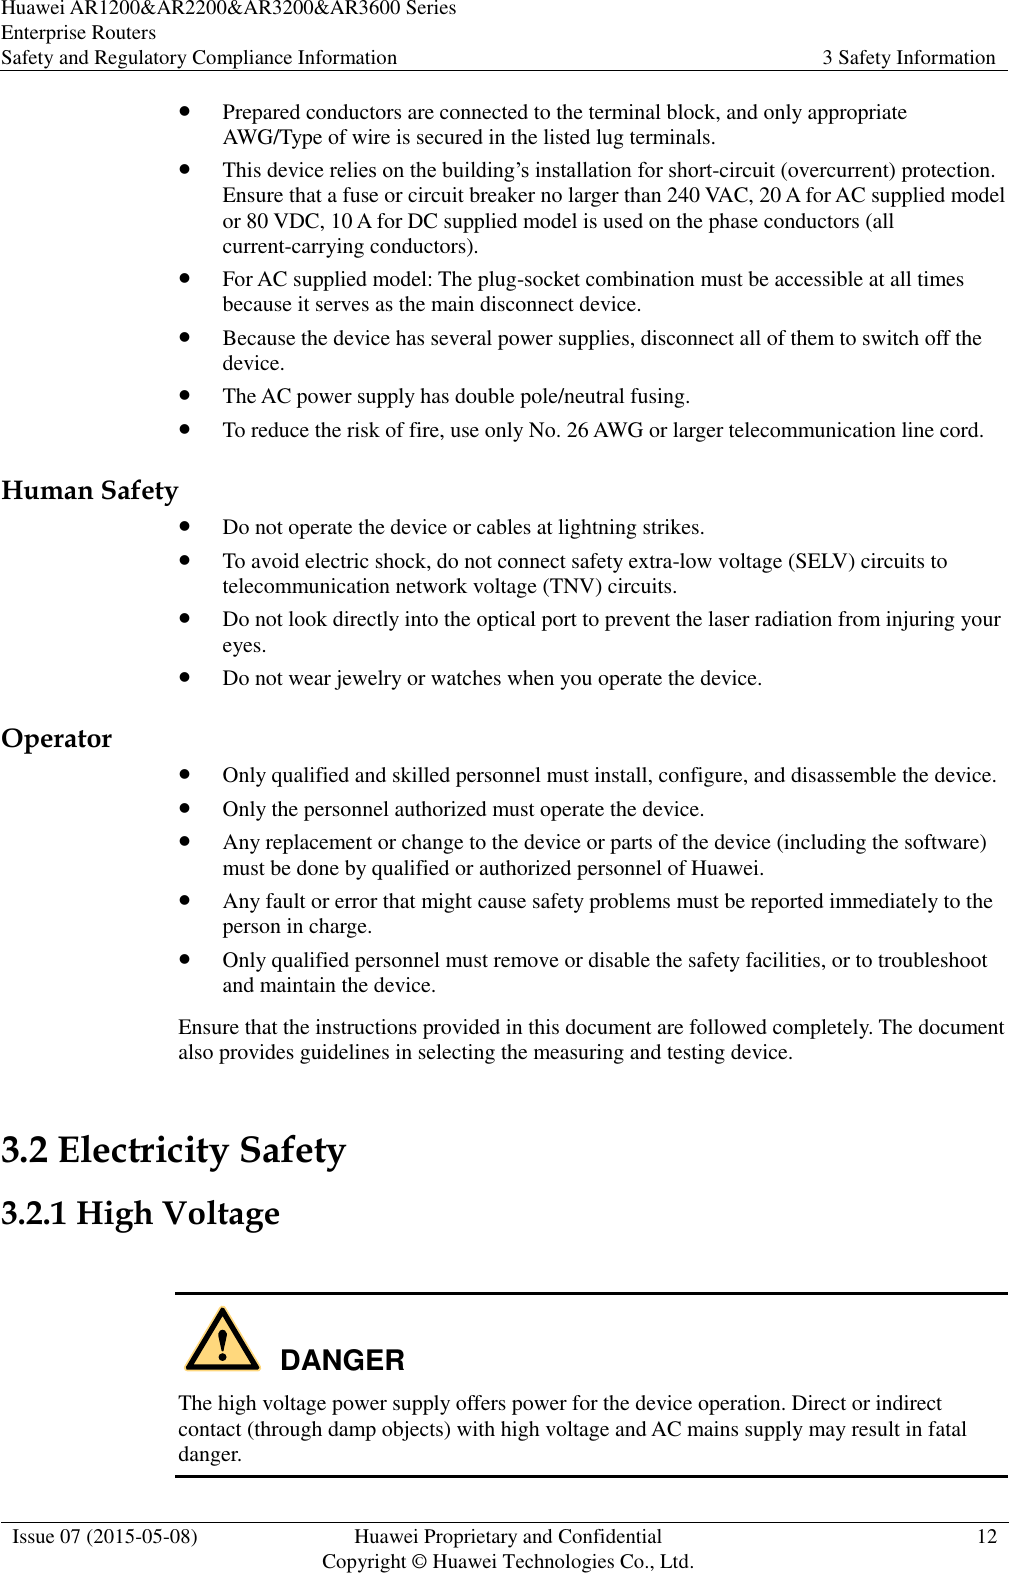 Huawei AR1200&amp;AR2200&amp;AR3200&amp;AR3600 Series Enterprise Routers Safety and Regulatory Compliance Information 3 Safety Information  Issue 07 (2015-05-08) Huawei Proprietary and Confidential           Copyright © Huawei Technologies Co., Ltd. 12   Prepared conductors are connected to the terminal block, and only appropriate AWG/Type of wire is secured in the listed lug terminals.  This device relies on the building’s installation for short-circuit (overcurrent) protection. Ensure that a fuse or circuit breaker no larger than 240 VAC, 20 A for AC supplied model or 80 VDC, 10 A for DC supplied model is used on the phase conductors (all current-carrying conductors).  For AC supplied model: The plug-socket combination must be accessible at all times because it serves as the main disconnect device.  Because the device has several power supplies, disconnect all of them to switch off the device.  The AC power supply has double pole/neutral fusing.  To reduce the risk of fire, use only No. 26 AWG or larger telecommunication line cord. Human Safety  Do not operate the device or cables at lightning strikes.  To avoid electric shock, do not connect safety extra-low voltage (SELV) circuits to telecommunication network voltage (TNV) circuits.  Do not look directly into the optical port to prevent the laser radiation from injuring your eyes.  Do not wear jewelry or watches when you operate the device. Operator  Only qualified and skilled personnel must install, configure, and disassemble the device.  Only the personnel authorized must operate the device.  Any replacement or change to the device or parts of the device (including the software) must be done by qualified or authorized personnel of Huawei.  Any fault or error that might cause safety problems must be reported immediately to the person in charge.  Only qualified personnel must remove or disable the safety facilities, or to troubleshoot and maintain the device. Ensure that the instructions provided in this document are followed completely. The document also provides guidelines in selecting the measuring and testing device. 3.2 Electricity Safety 3.2.1 High Voltage   The high voltage power supply offers power for the device operation. Direct or indirect contact (through damp objects) with high voltage and AC mains supply may result in fatal danger. DANGER